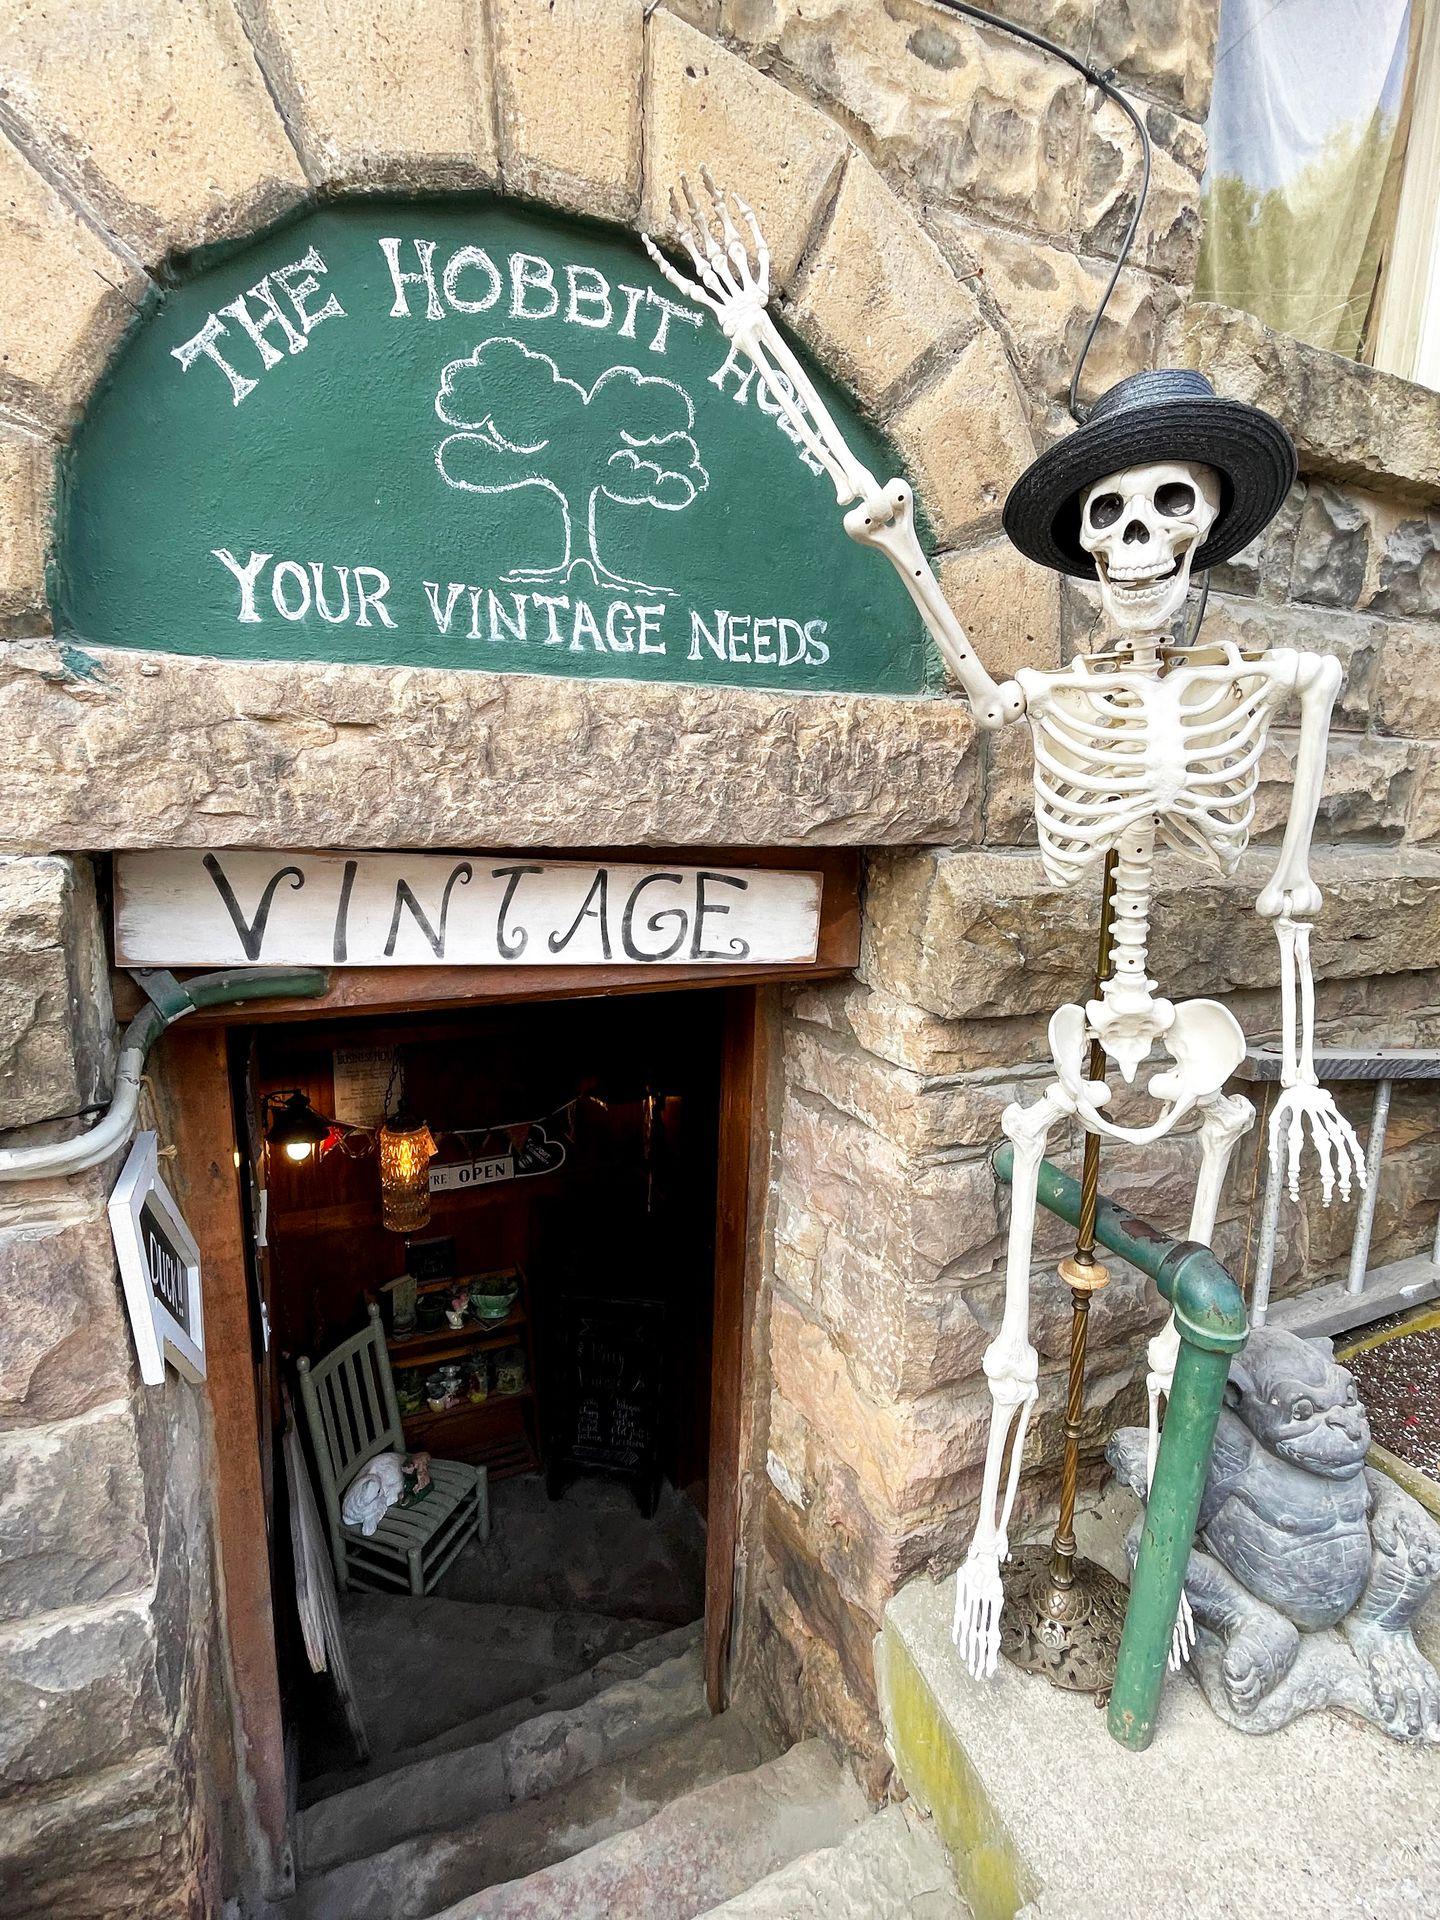 The exterior of the Hobbit Hole shop. There is a skeleton outside of the door and the steps lead down below street level.